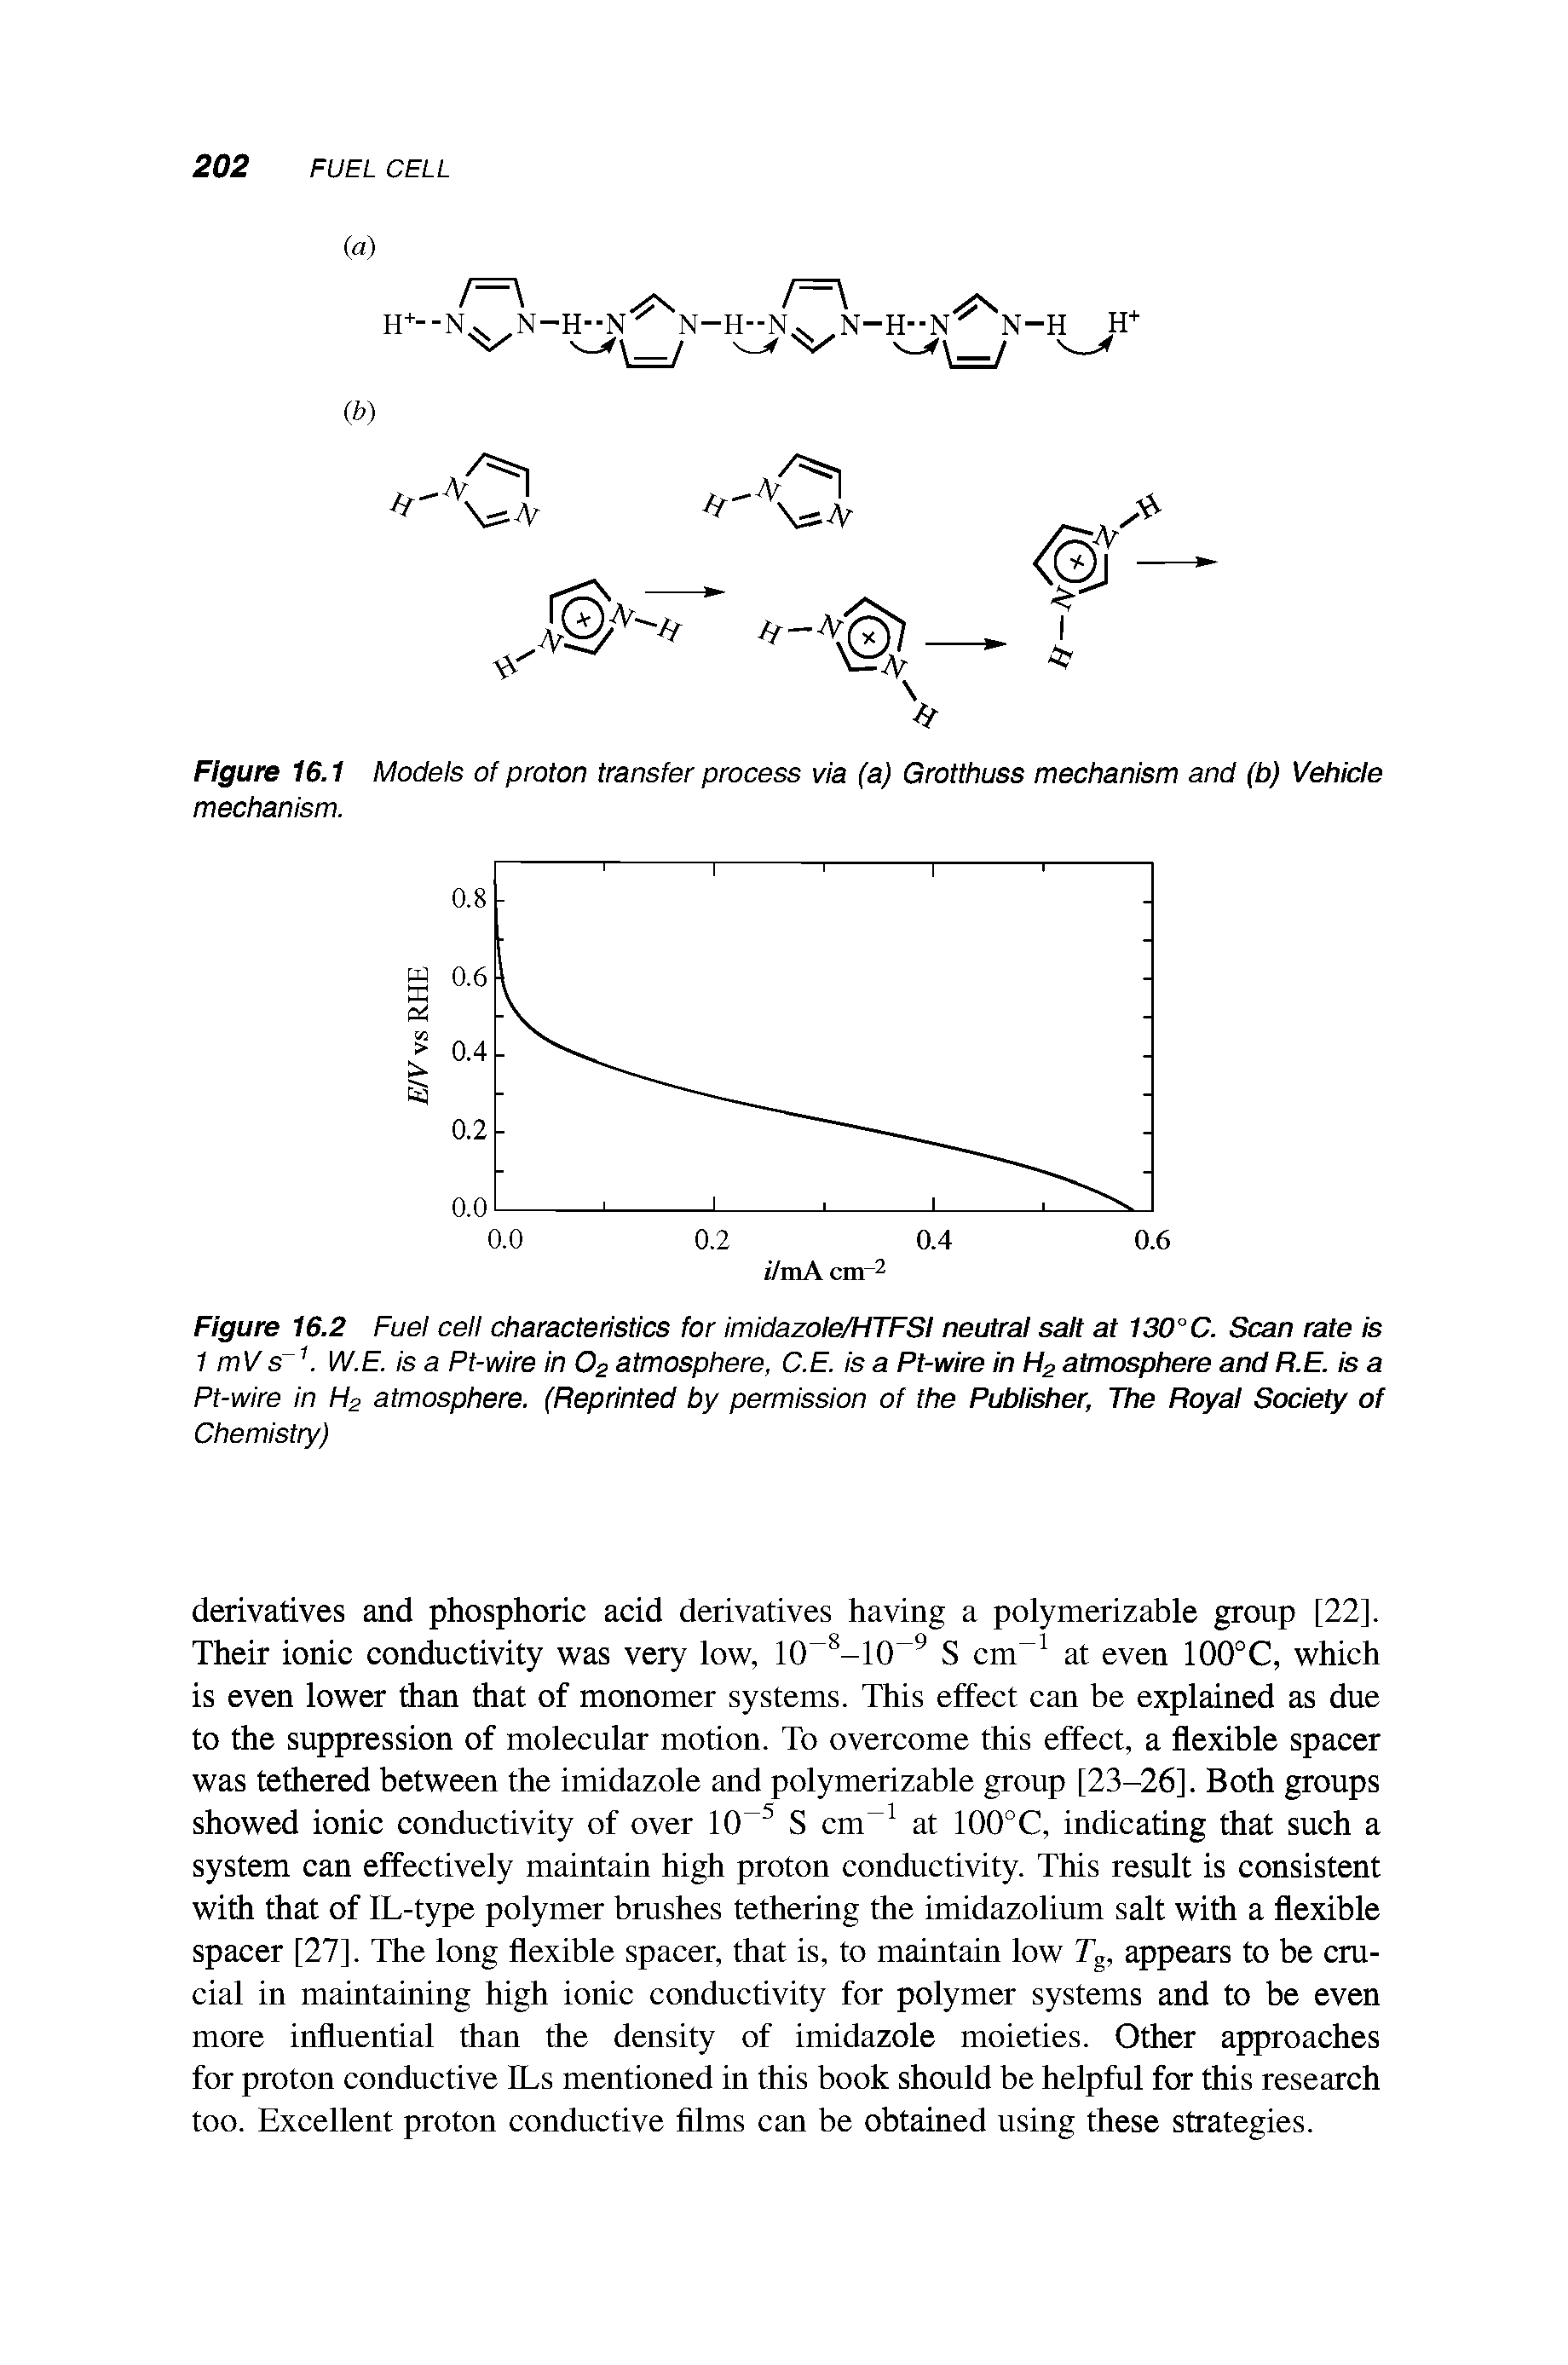 Figure 16.2 Fuel cell characteristics for imidazole/HTFSI neutral salt at 130°C. Scan rate is 1 mV s. W.E. is a Pt-wire in Oz atmosphere, C.E. isaPt-wirein Hz atmosphere and R.E. is a Pt-wire in Hz atmosphere. (Reprinted by permission of the Publisher, The Royal Society of Chemistry)...